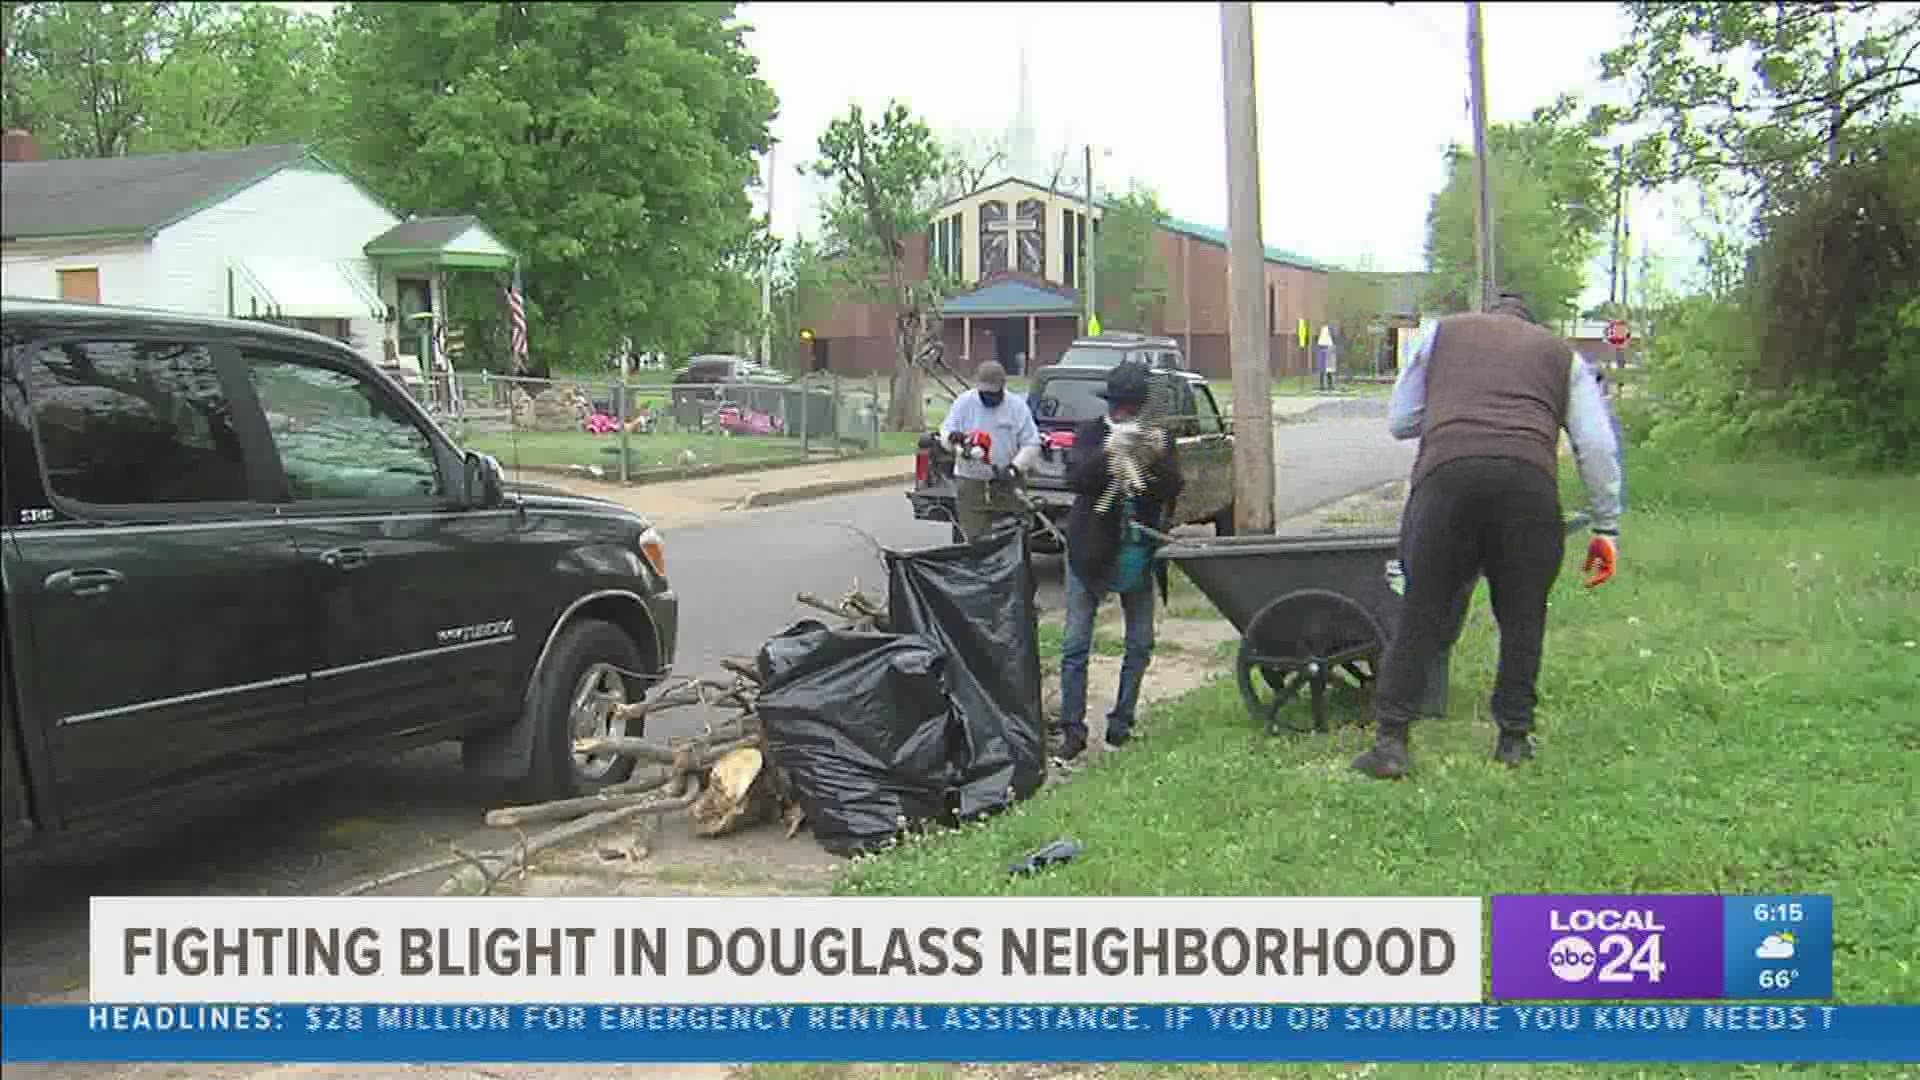 'The Time is Now Douglass' is working to return Douglass to its former glory.